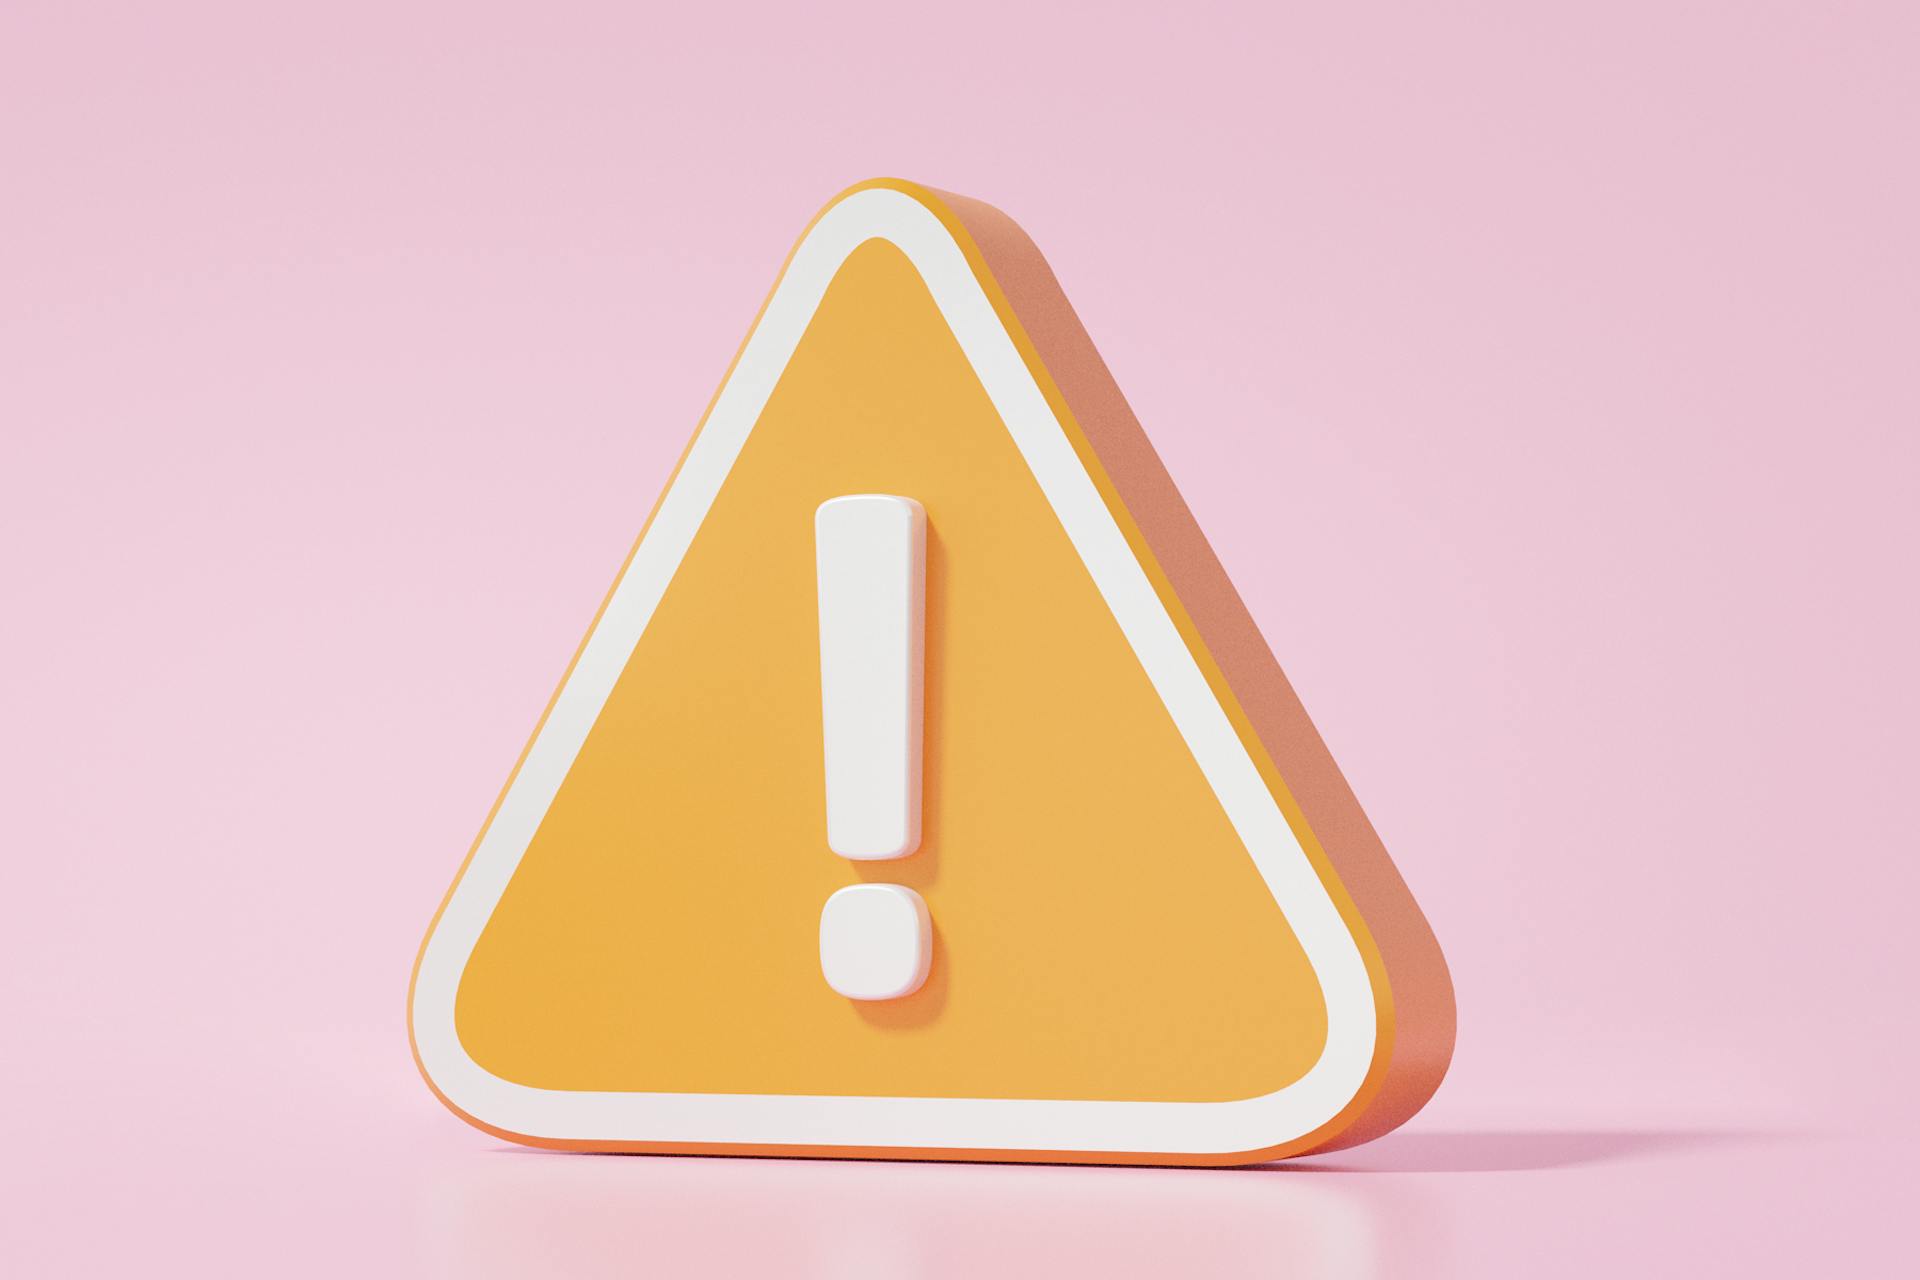 Yellow yield sign on a pink background. Don't make these common social media mistakes!